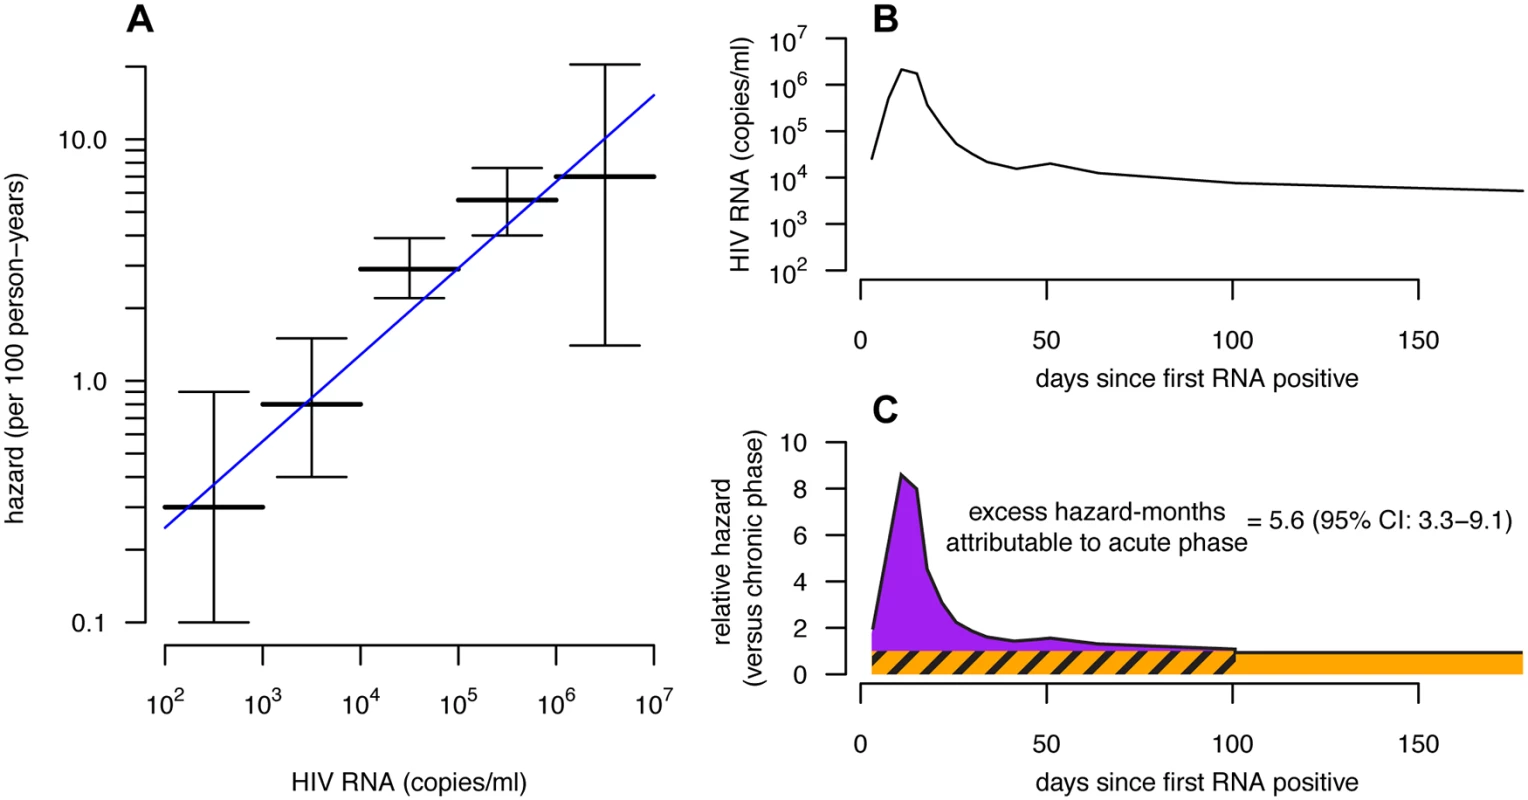 Viral-load-based estimates of excess hazard-months due to the acute phase.